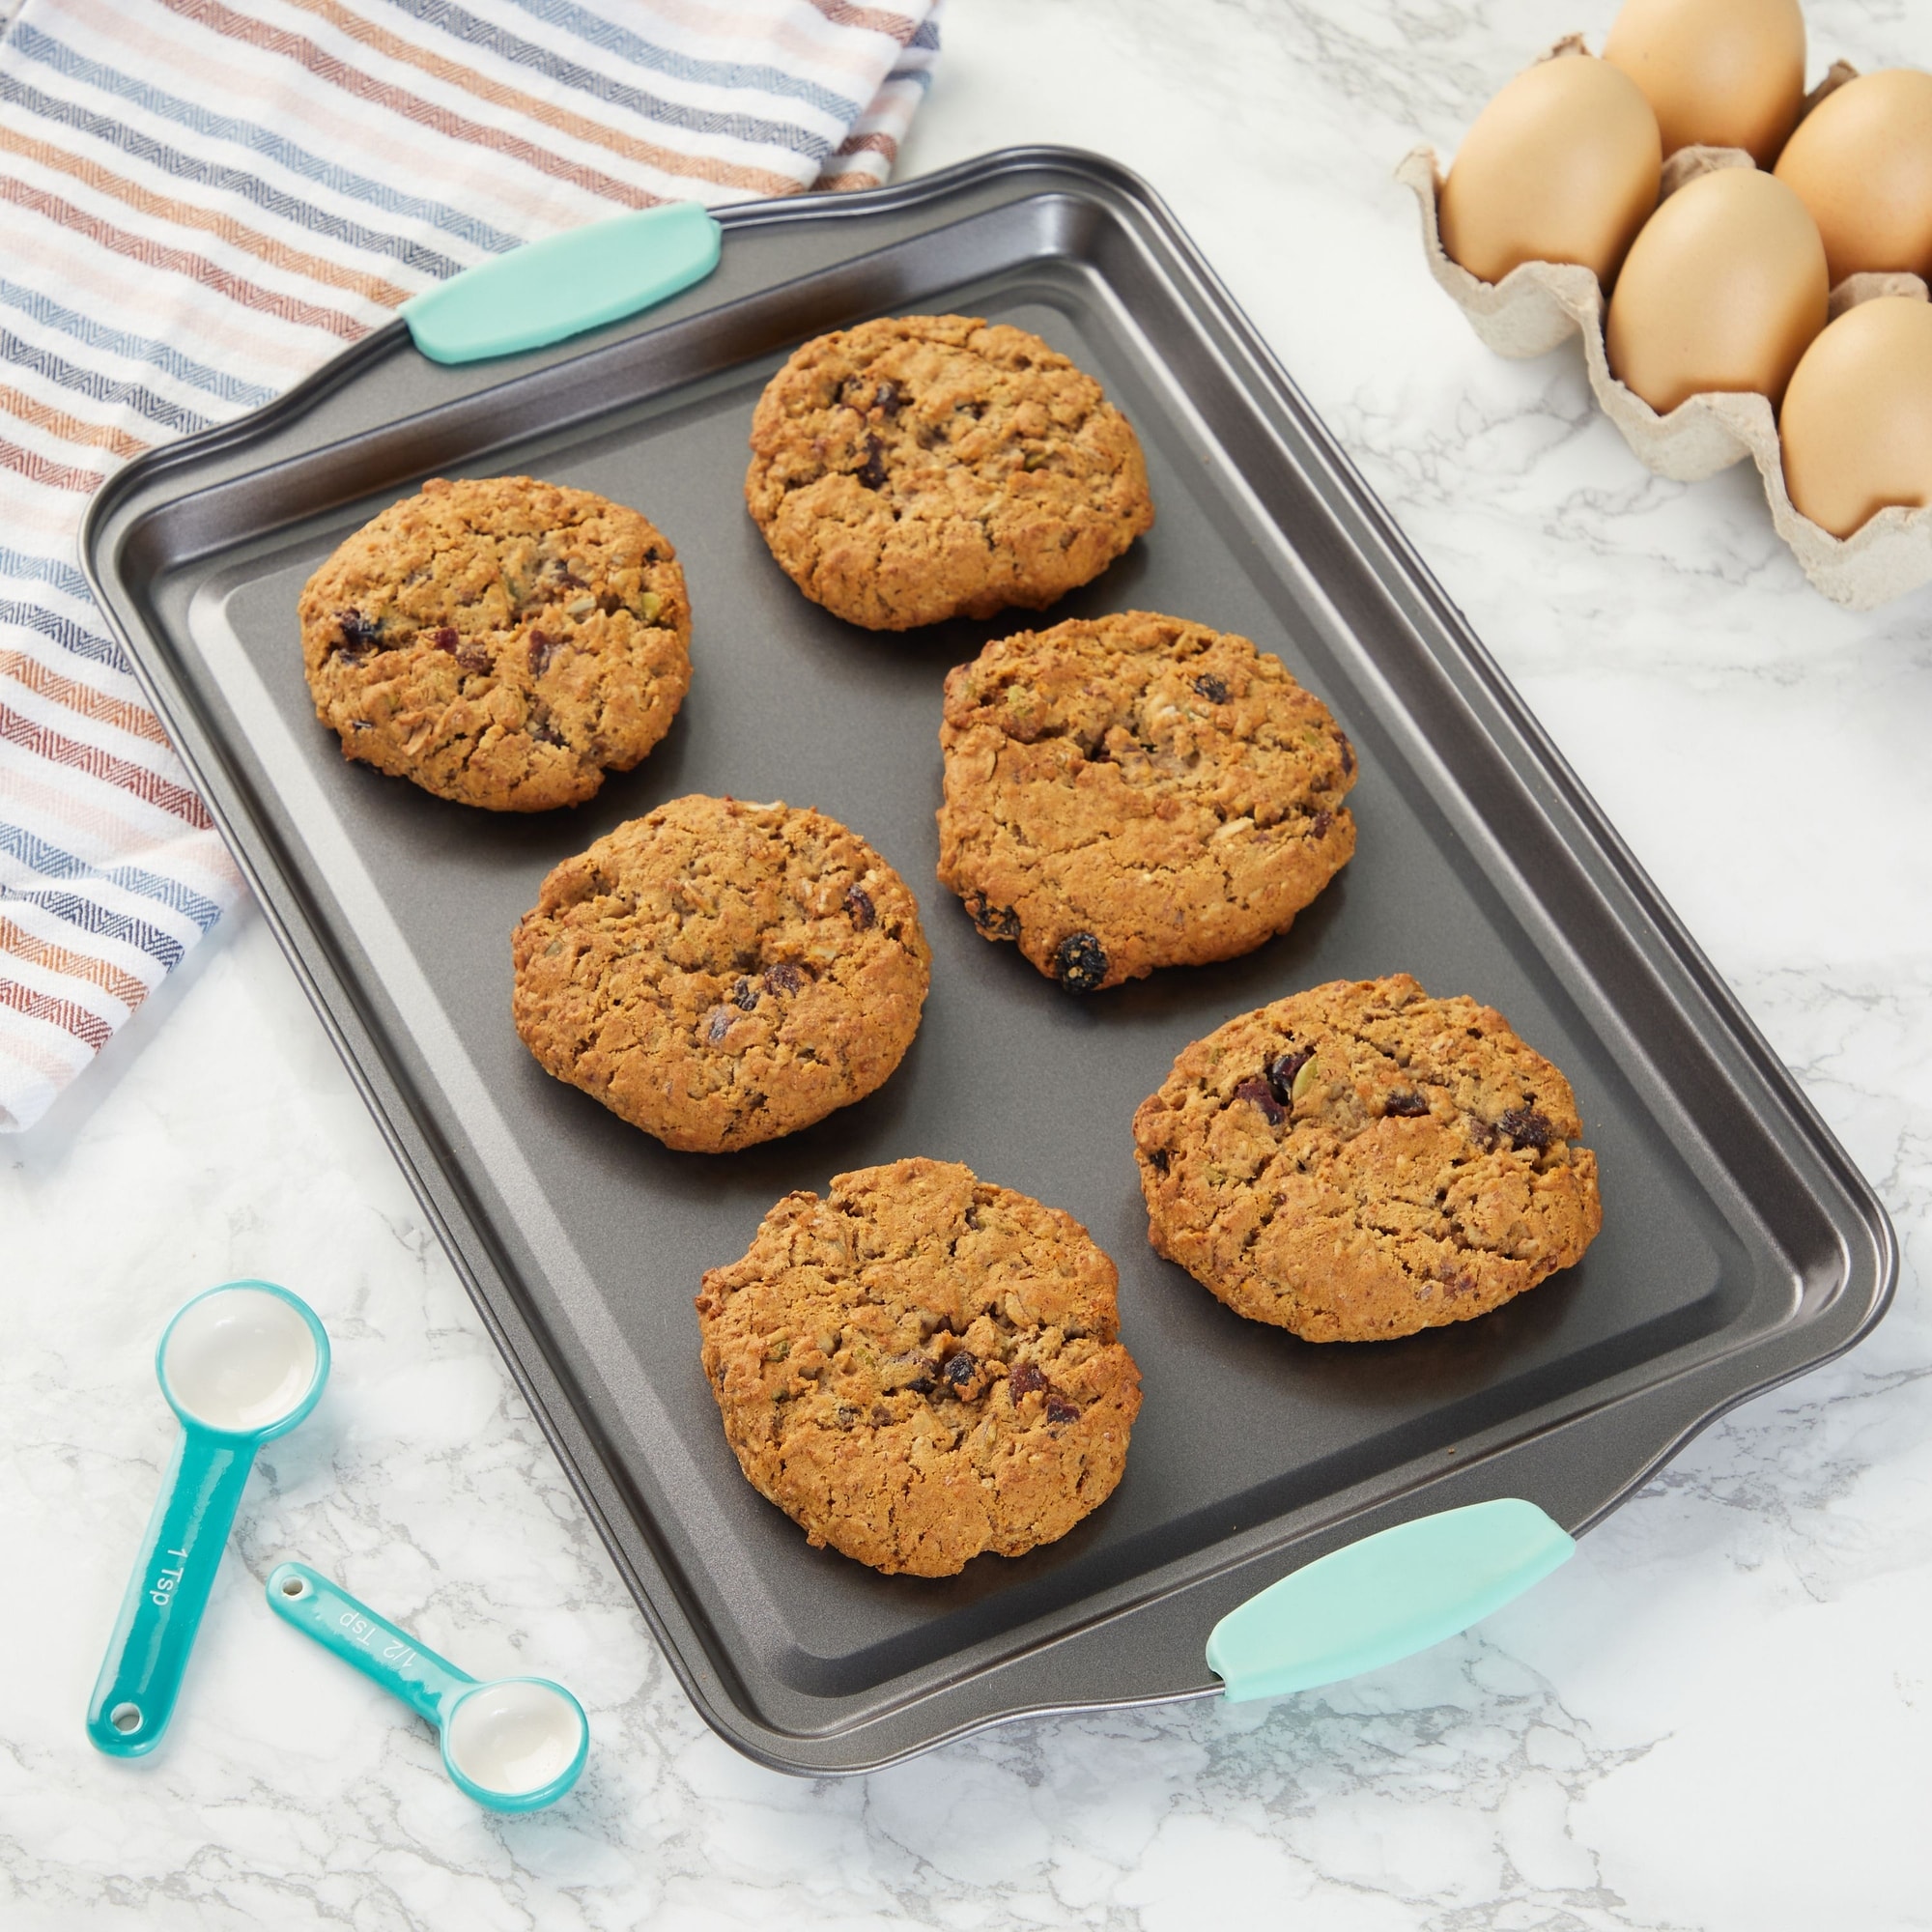 https://ak1.ostkcdn.com/images/products/is/images/direct/321273cd03d8522cb77ccb327e0feda3b858a039/Set-of-3-Nonstick-Cookie-Sheets-for-Baking%2C-Bakeware-Pans-with-Silicone-Rubber-Handles-%2810-x-14-Inches%29.jpg